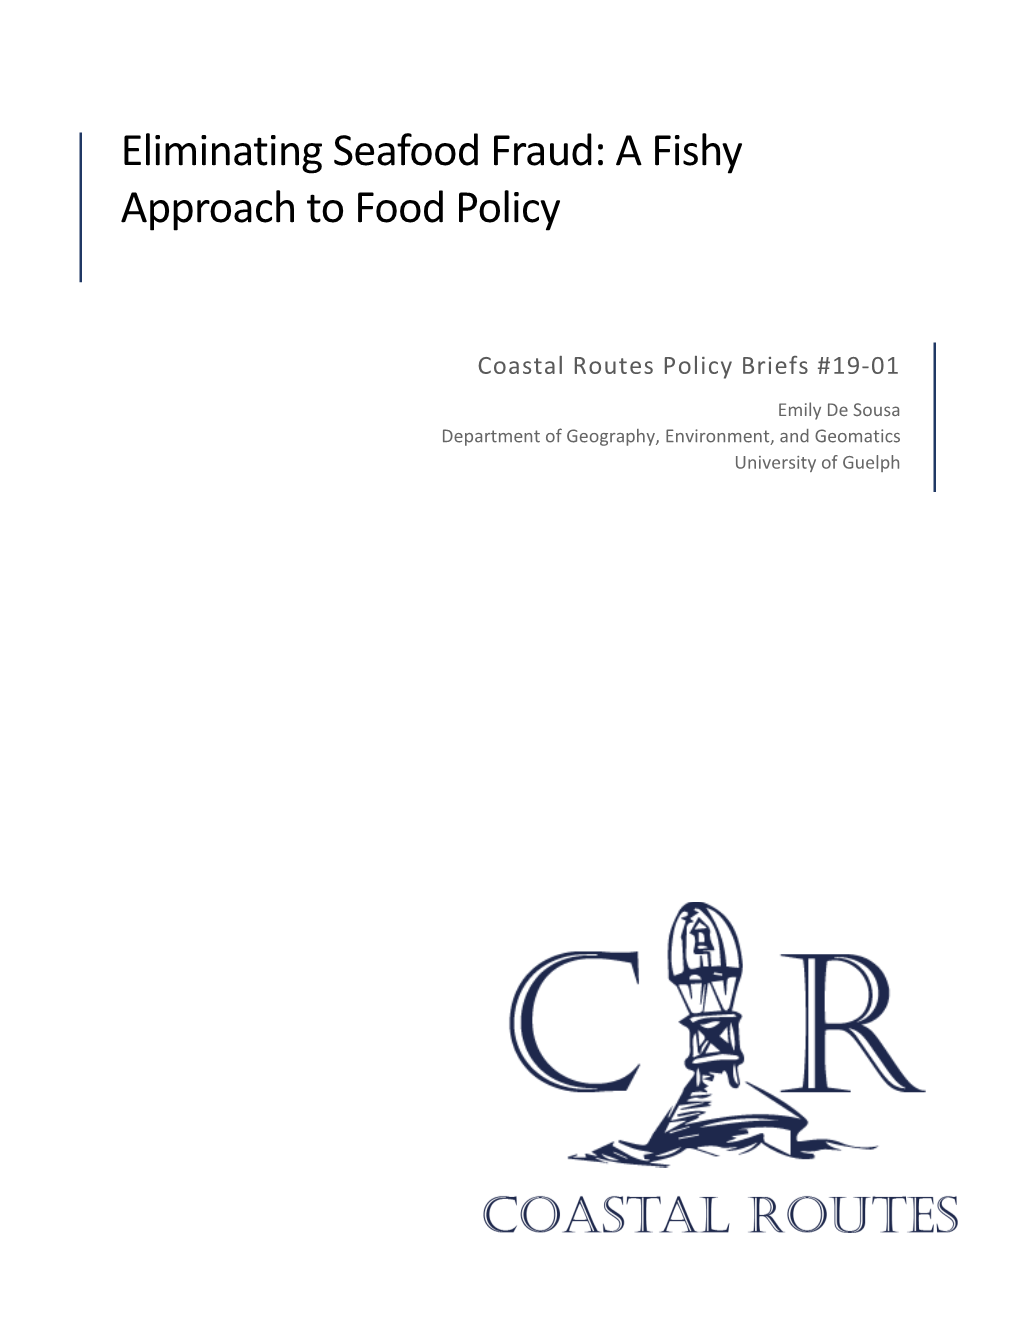 Eliminating Seafood Fraud: a Fishy Approach to Food Policy